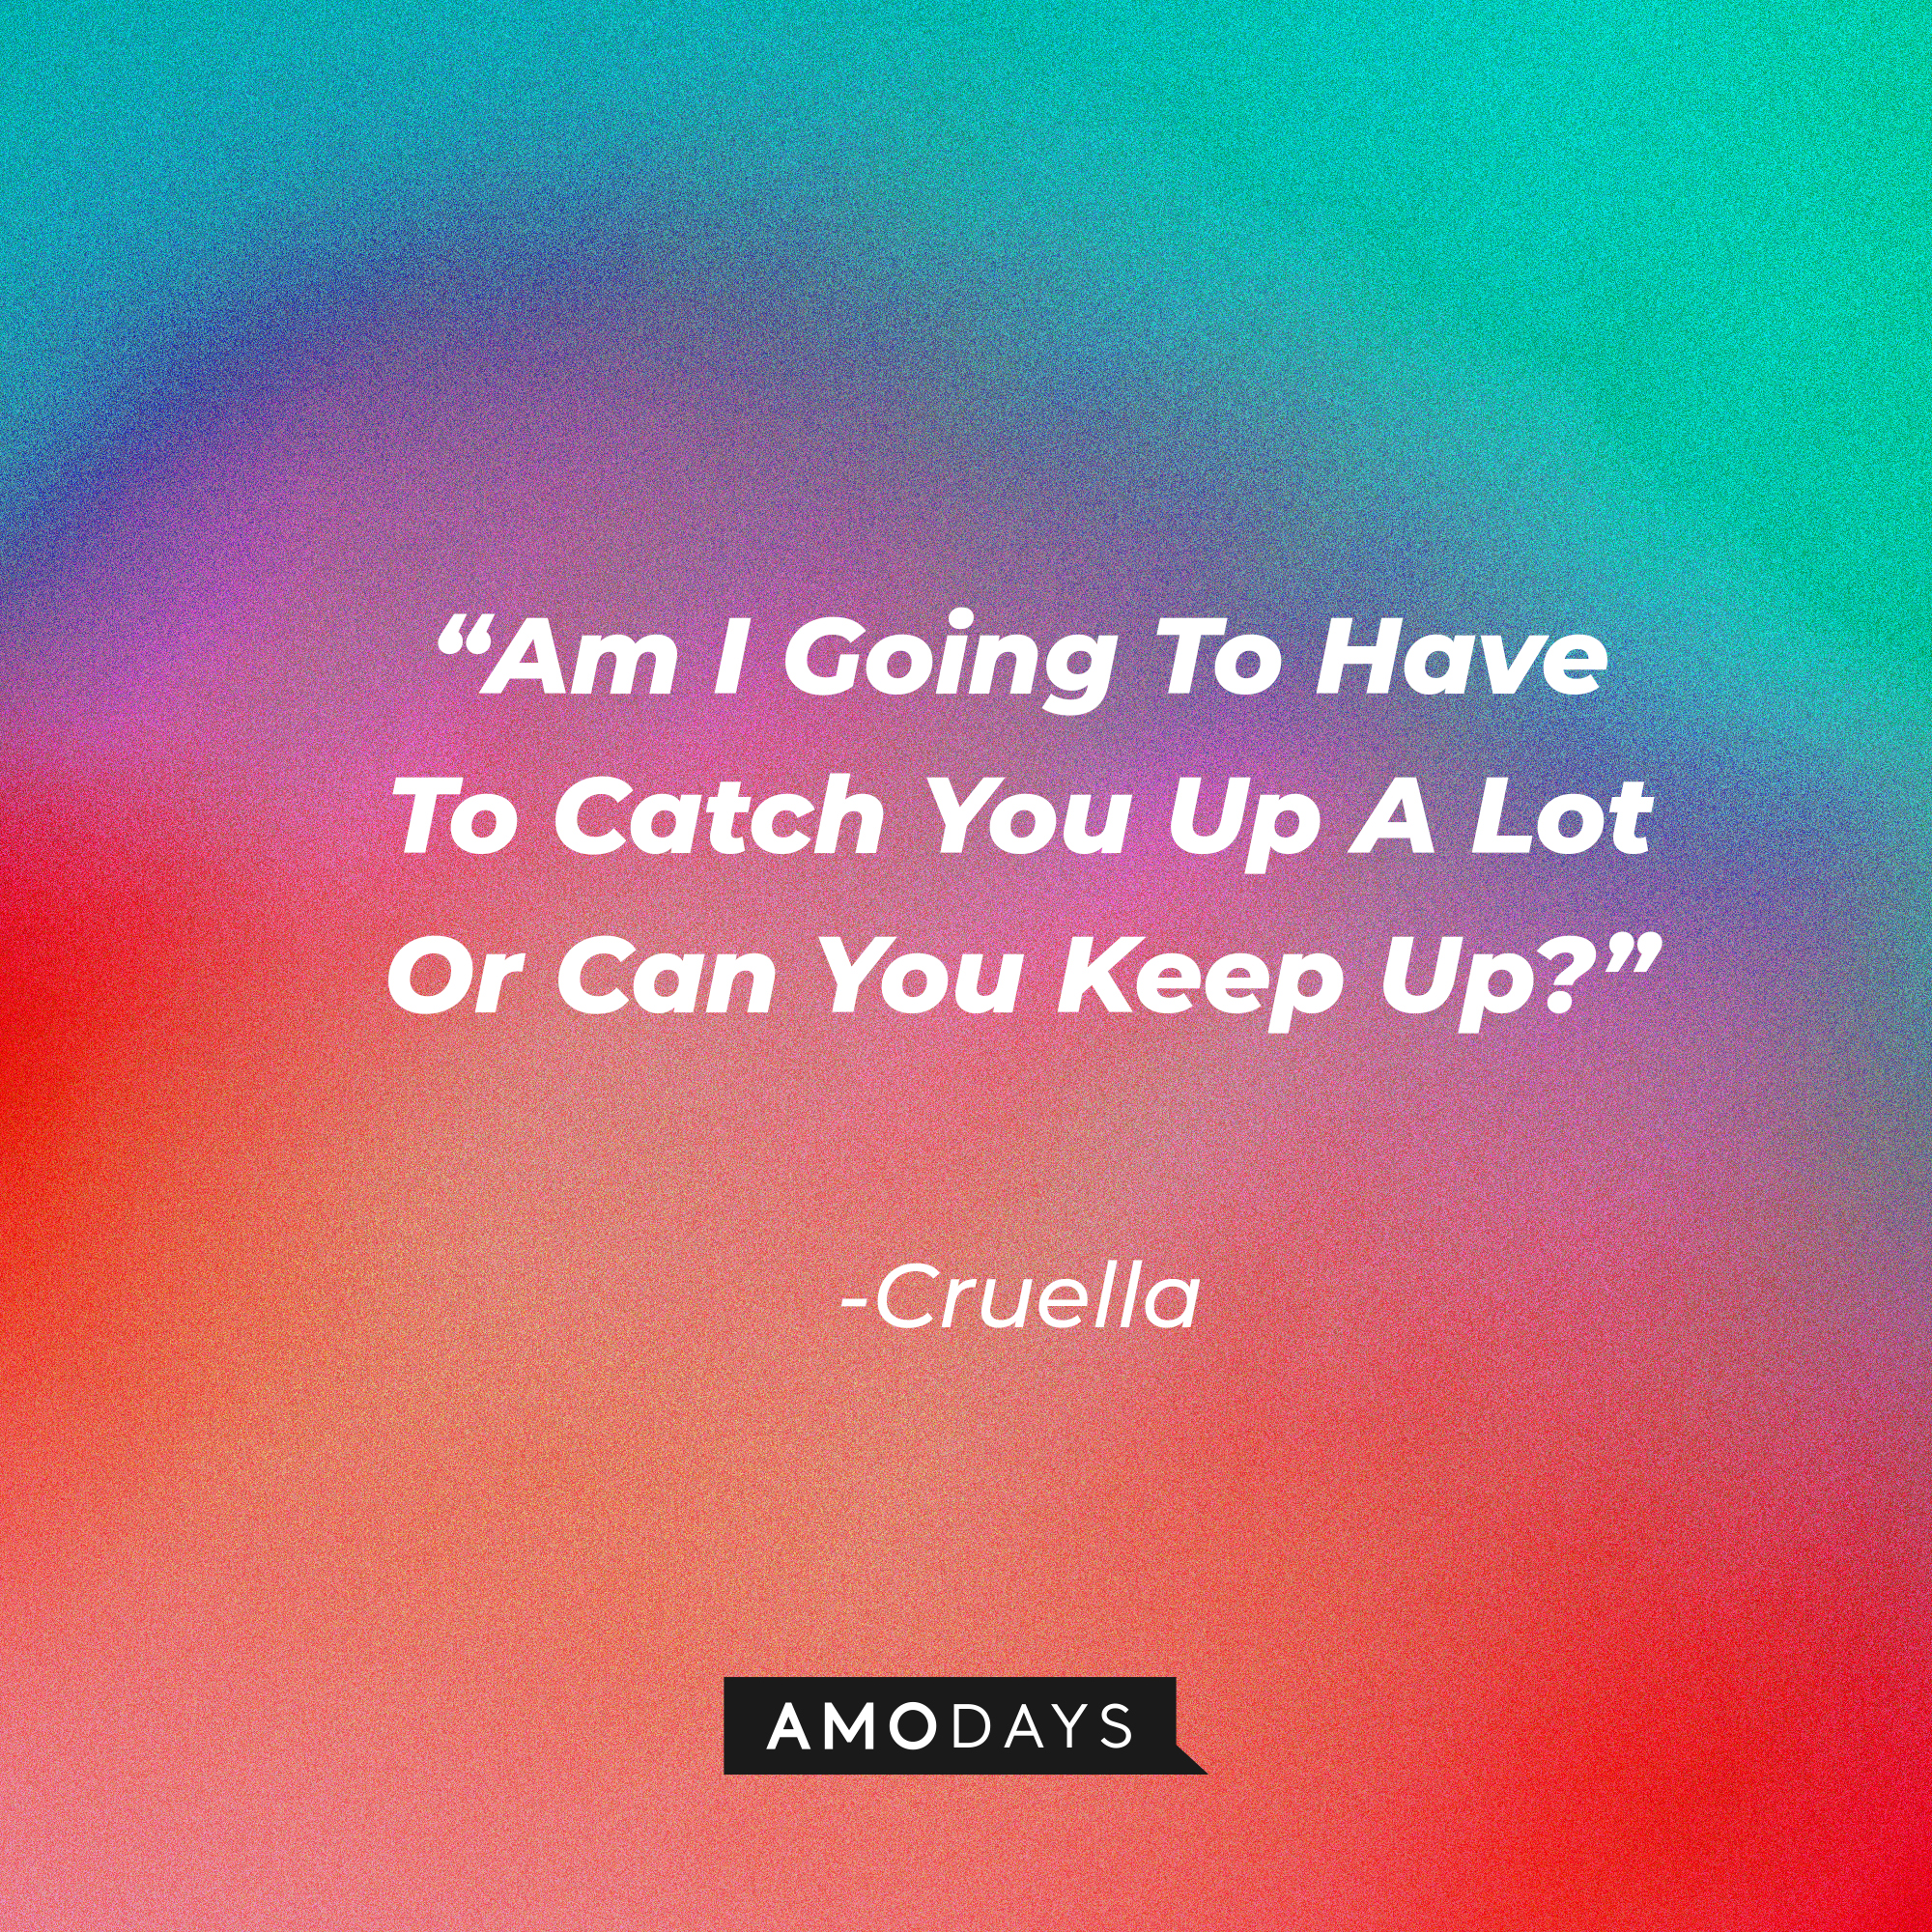 Cruella's quote: "Am I Going To Have To Catch You Up A Lot Or Can You Keep Up?" | Source: Amodays